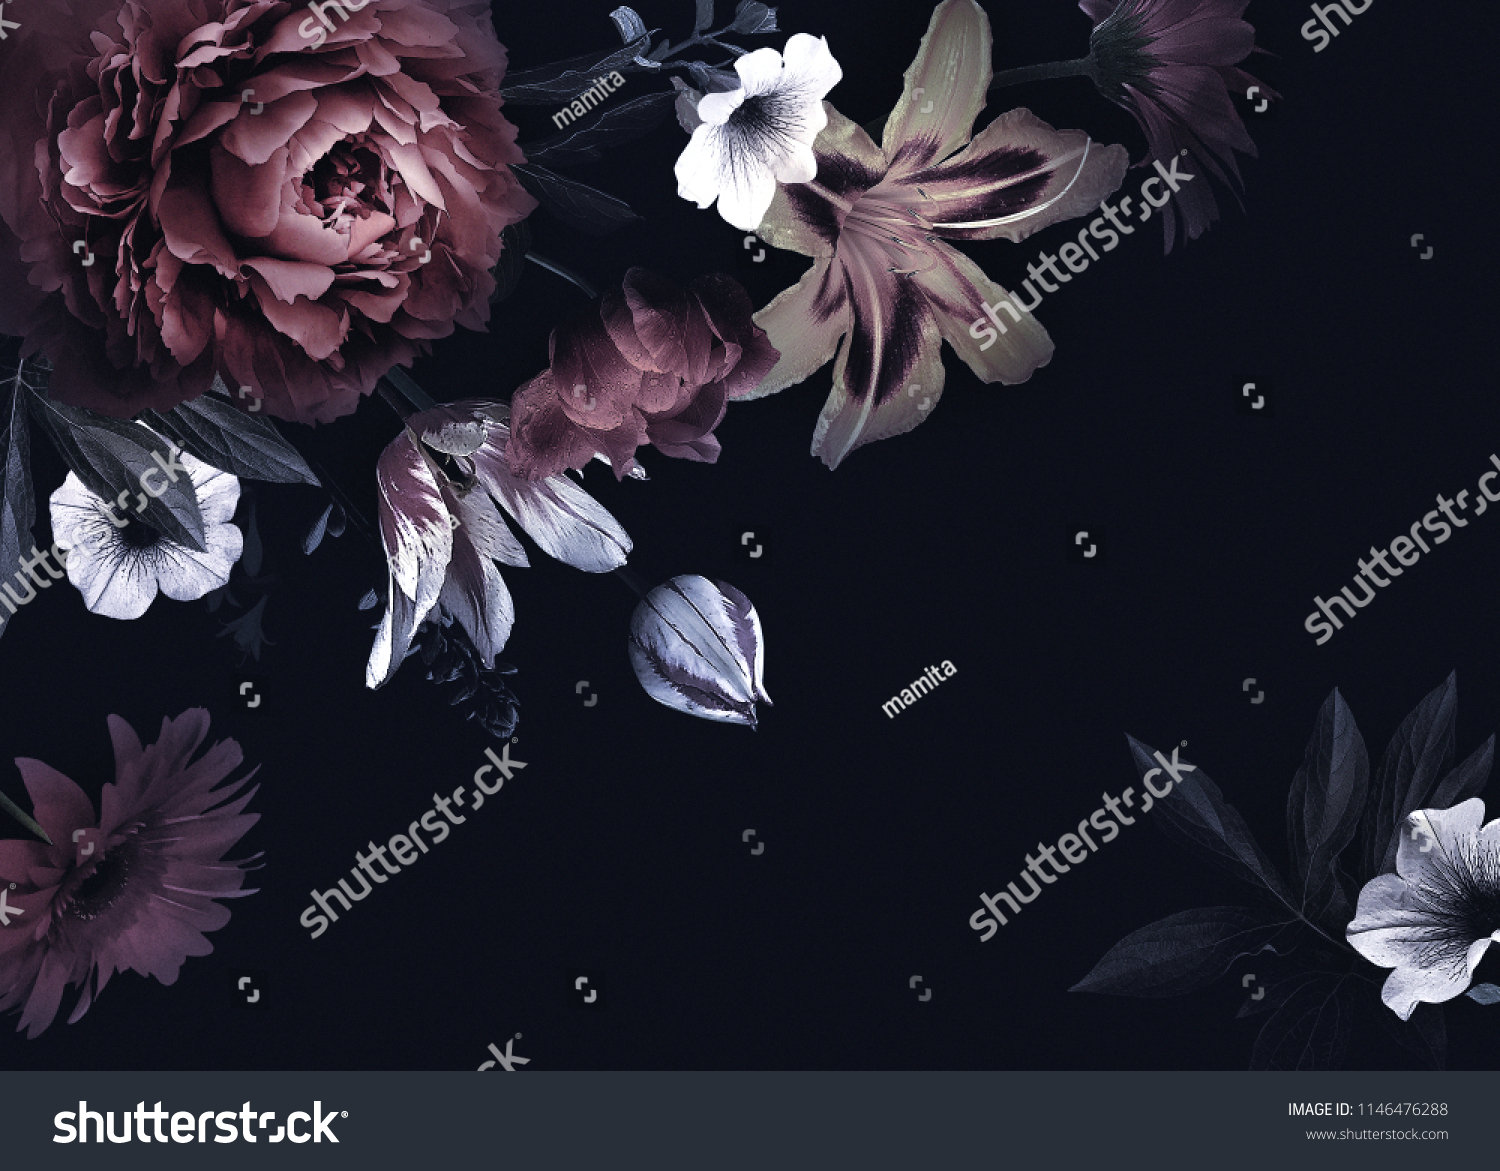 Floral vintage card with flowers. Peonies, tulips, lily, hydrangea on black background.  Template for design of wedding invitations, holiday greetings, business card, decoration packaging #1146476288